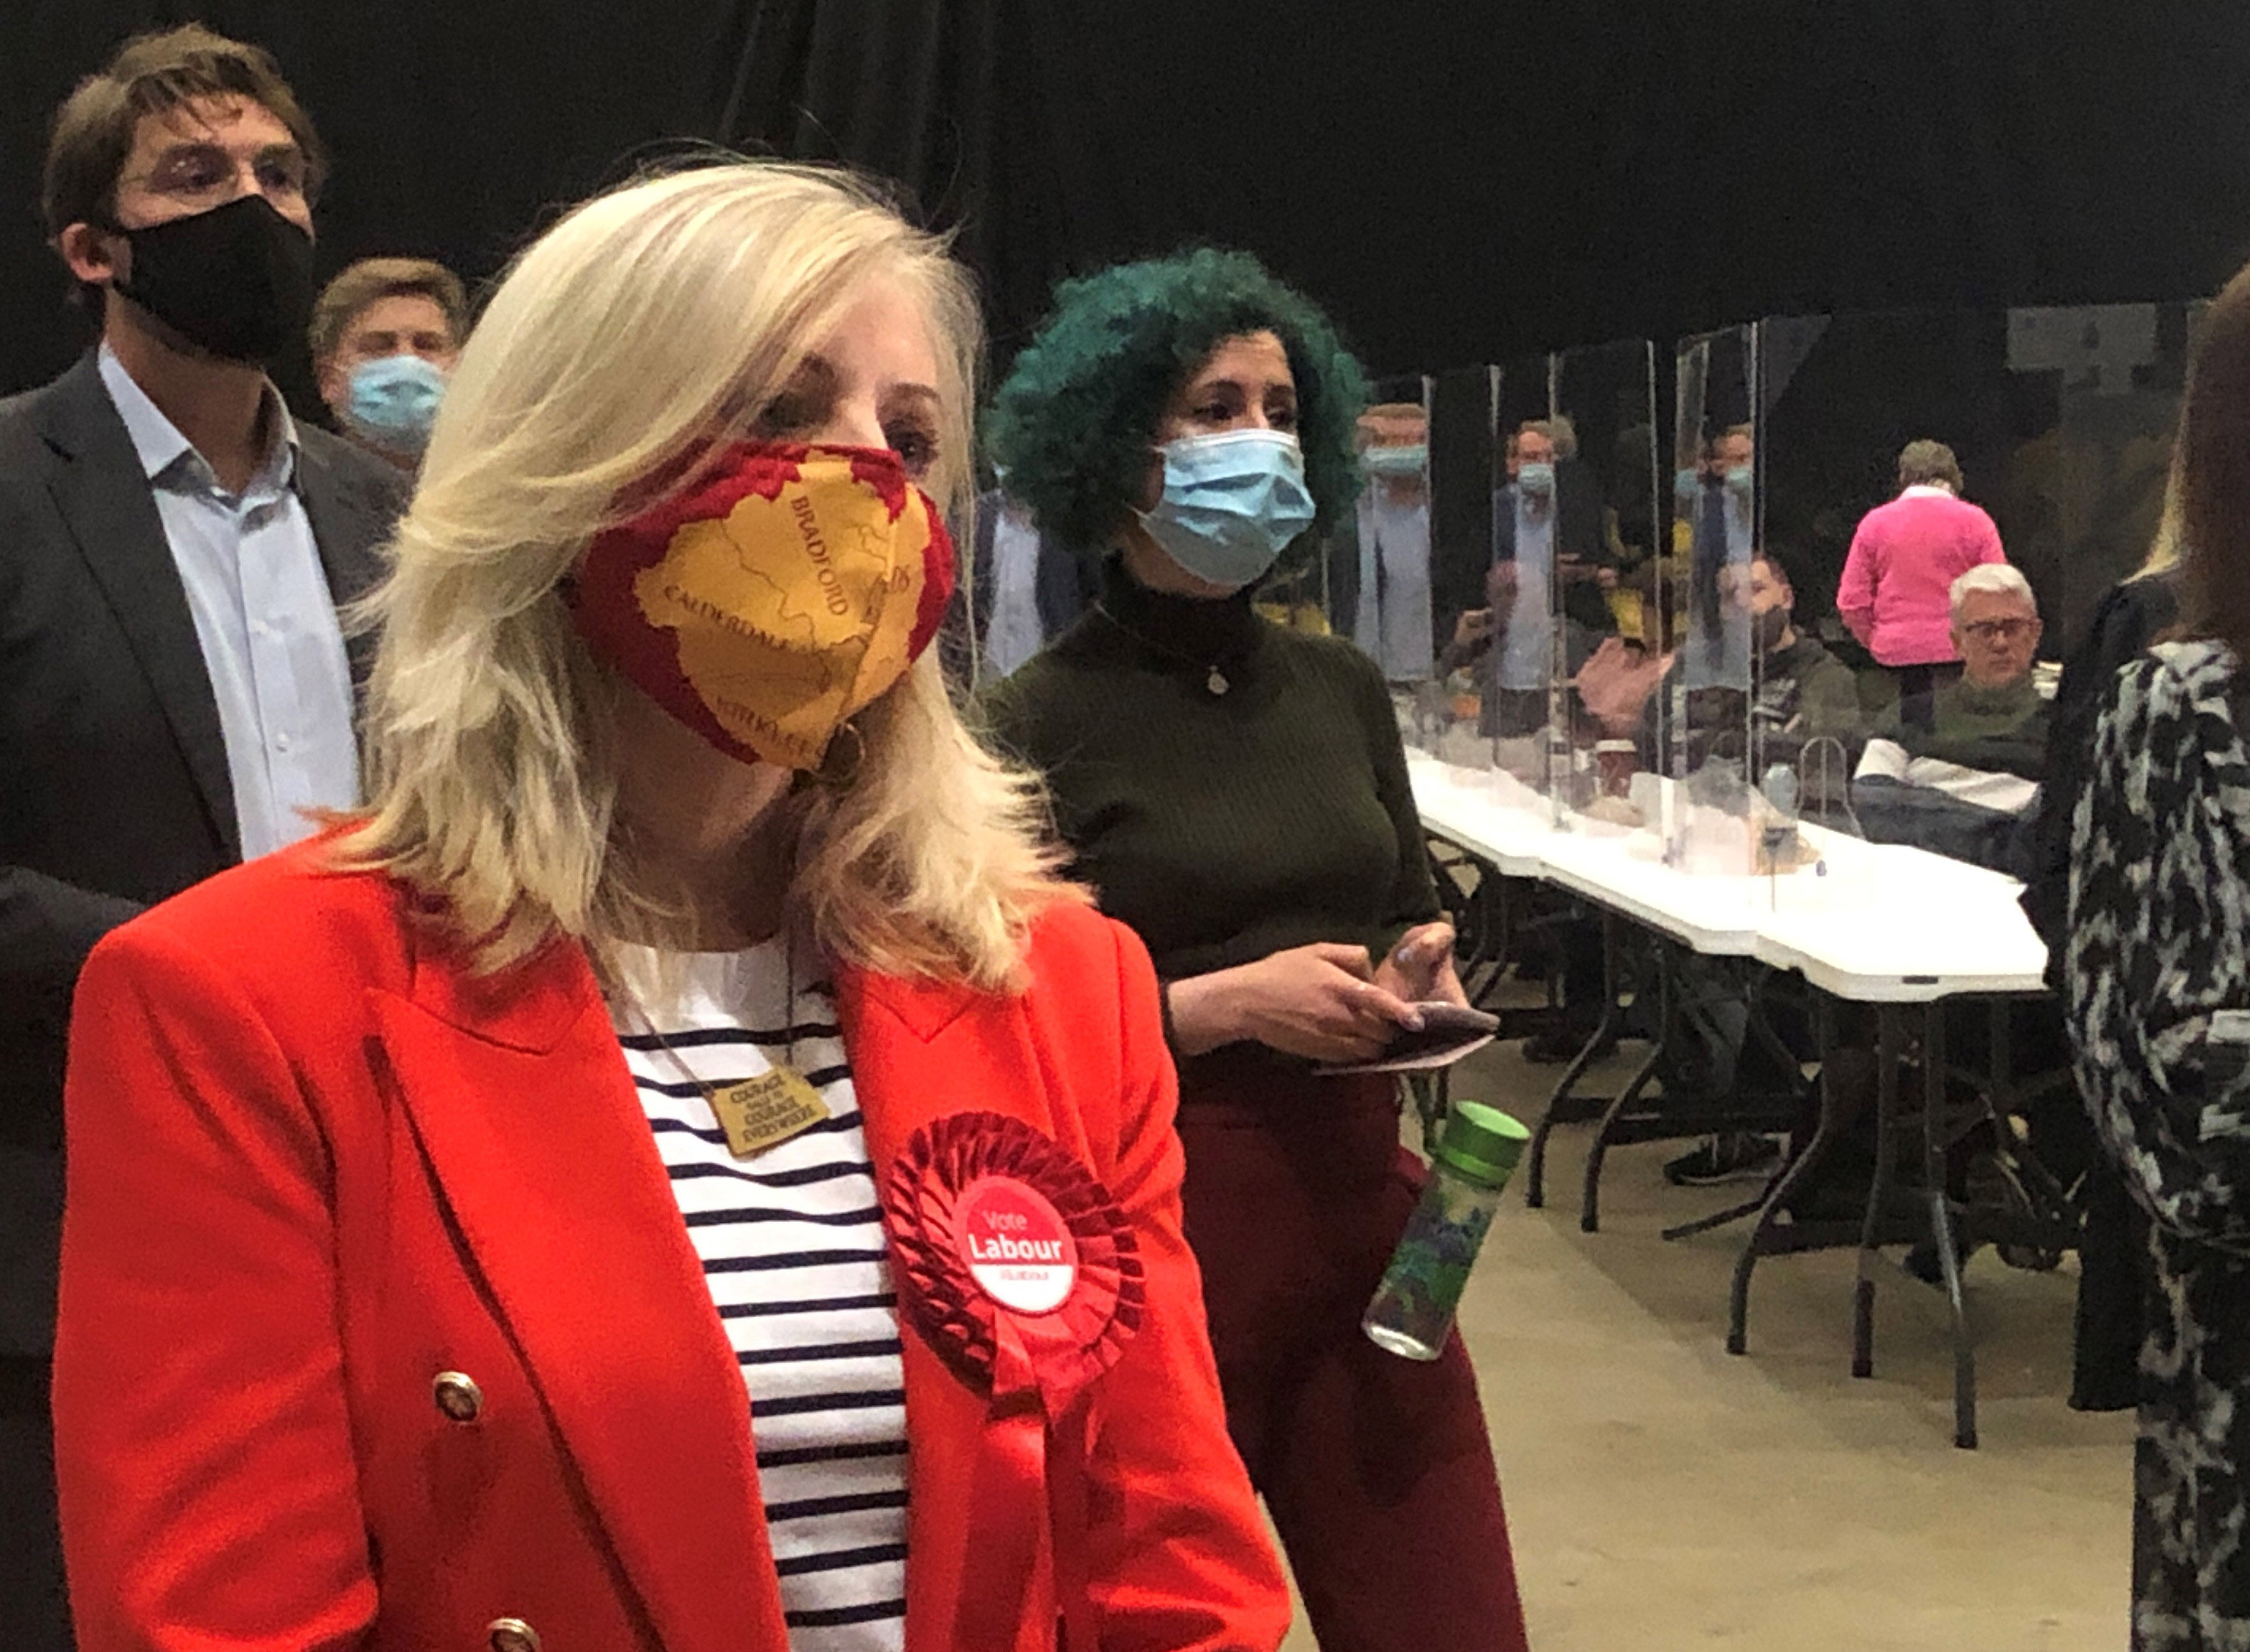 Labour’s Tracy Brabin during the count for the West Yorkshire mayoral election in Leeds – she became the first holder of the office (Amy Murphy/PA)